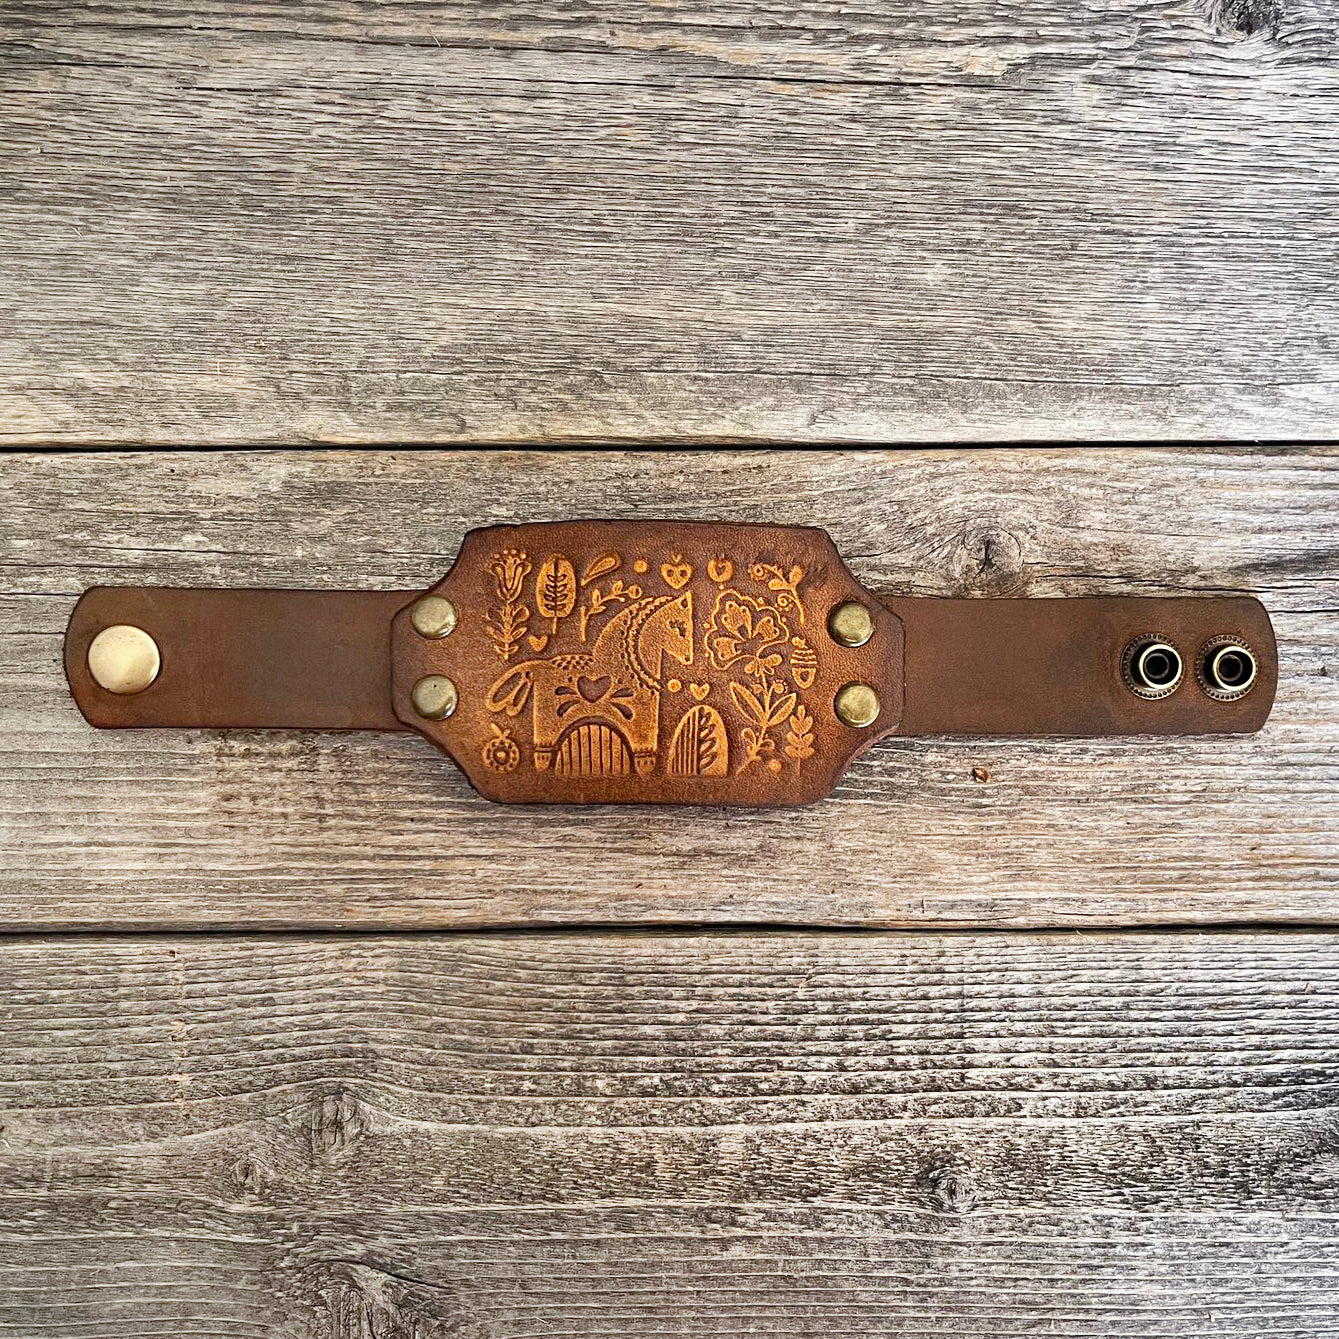 MADE TO ORDER - Genuine Leather Bracelet with Tooled Horse Design